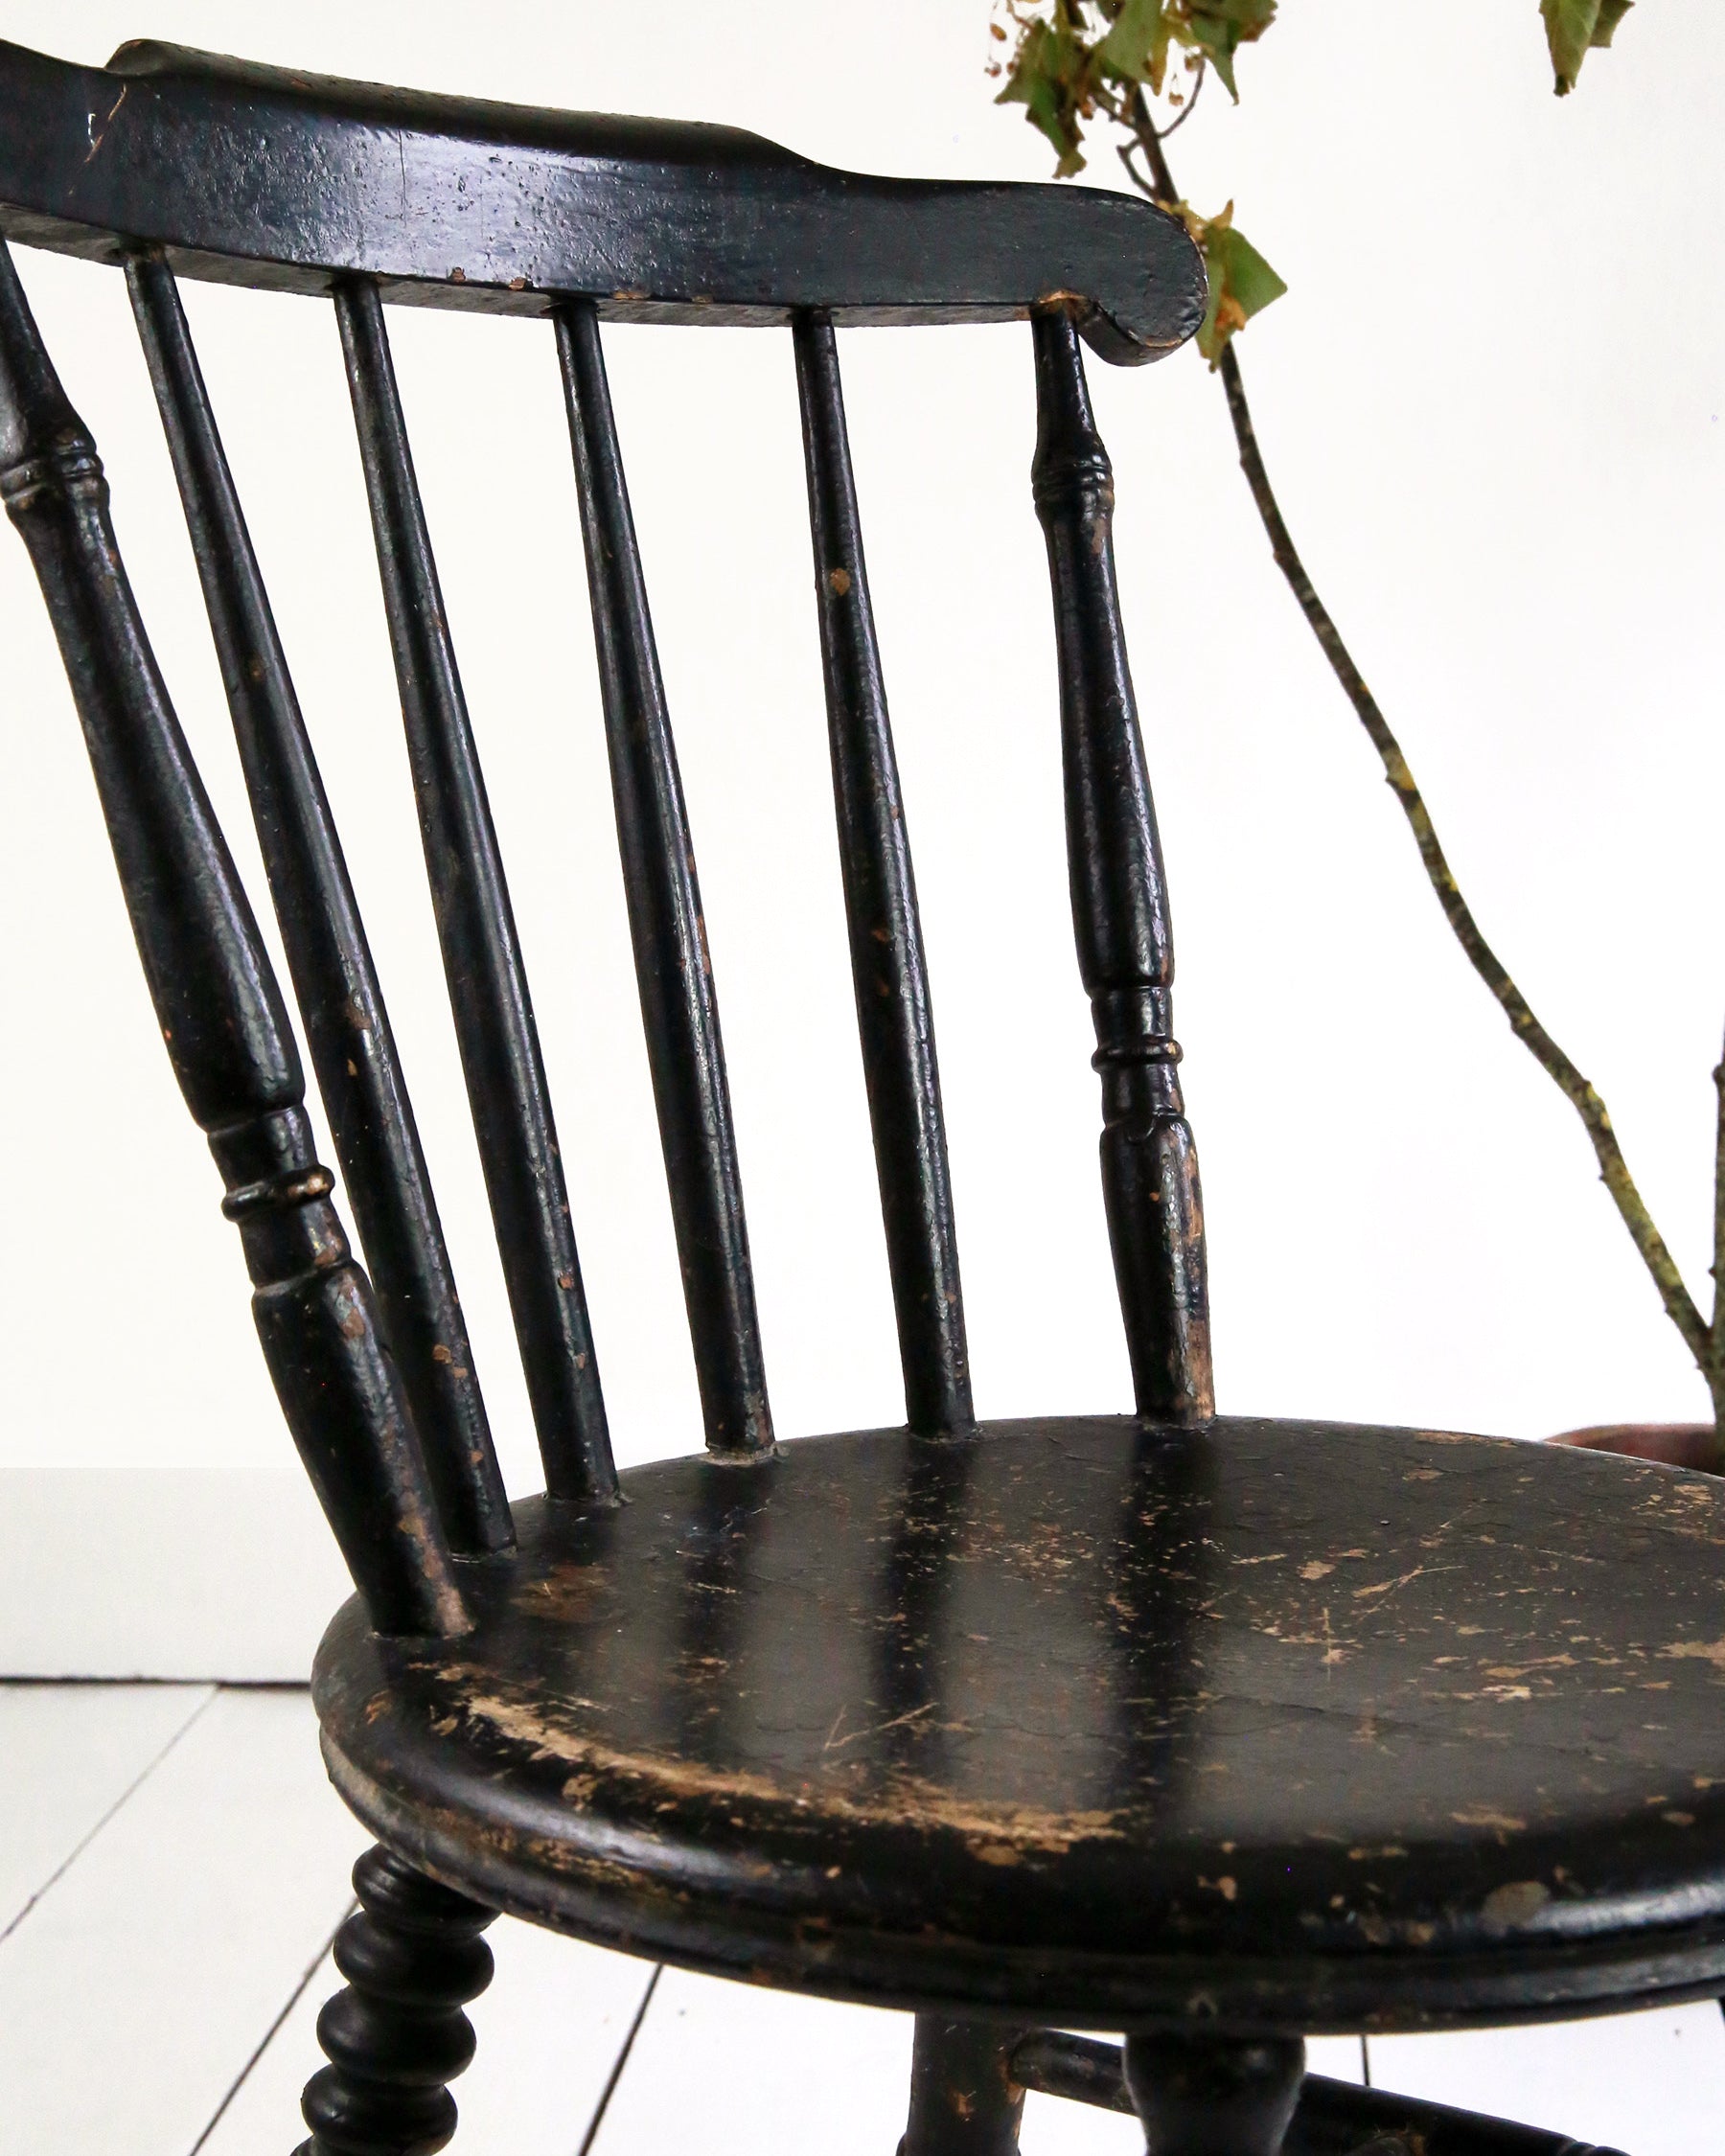 Ebonised Penny seat chair with authentic patina finish